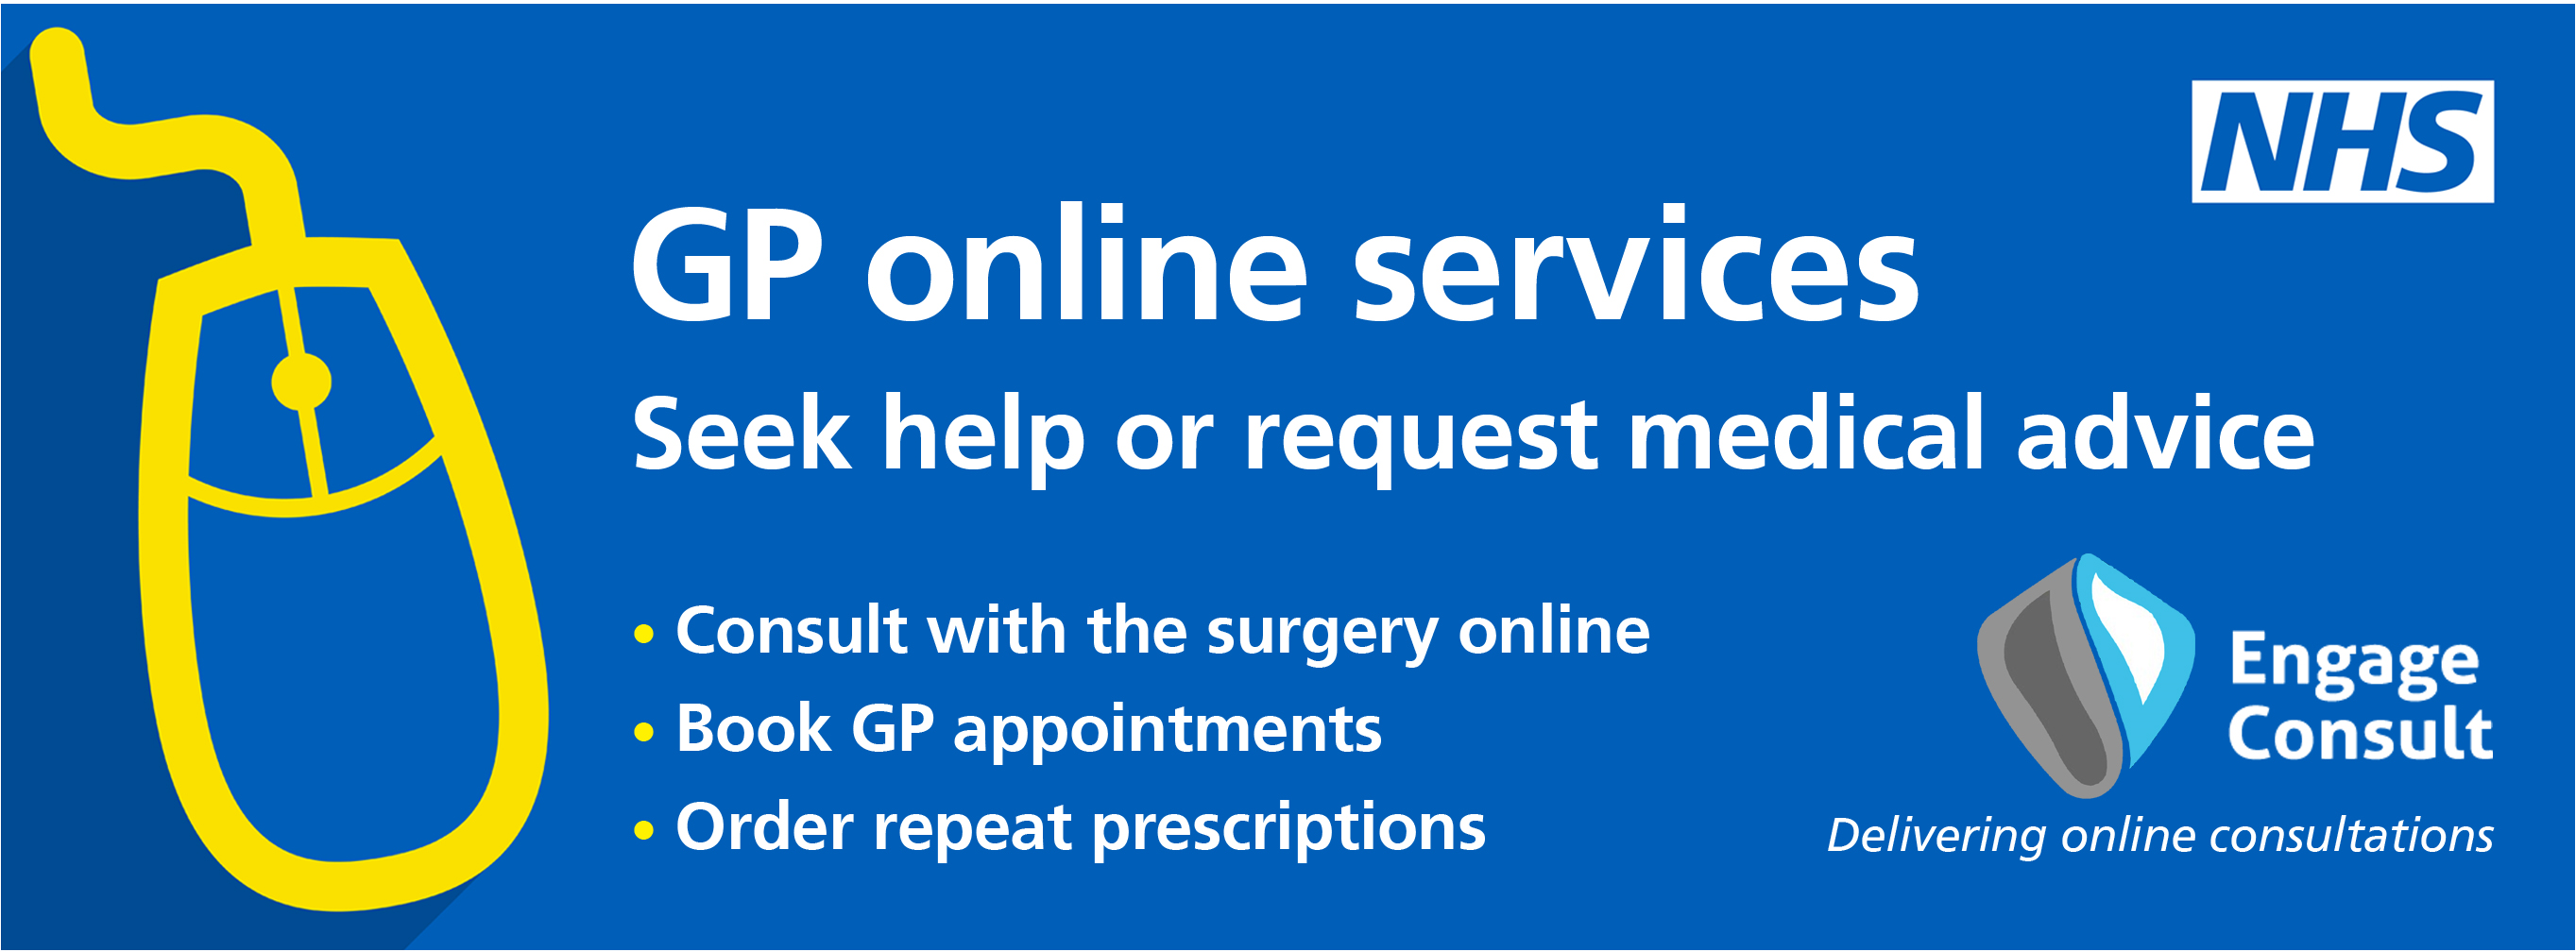 book dentist appointment online nhs